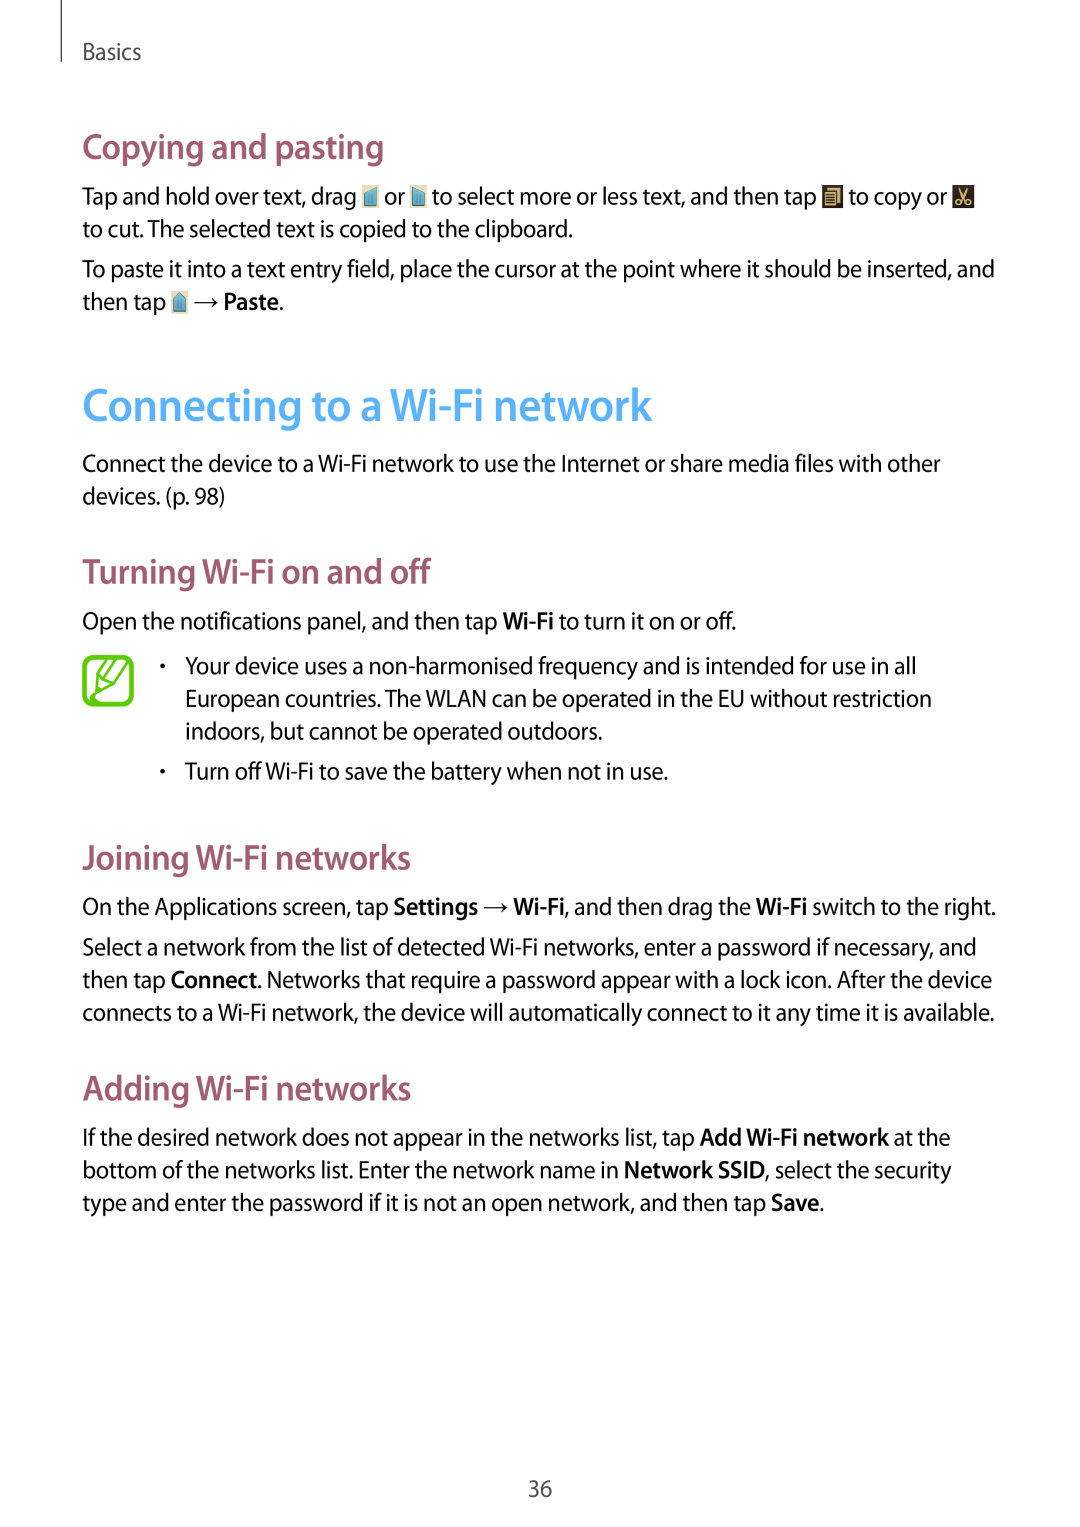 Samsung GT-I8730TAAMEO Connecting to a Wi-Fi network, Copying and pasting, Turning Wi-Fi on and off, Adding Wi-Fi networks 